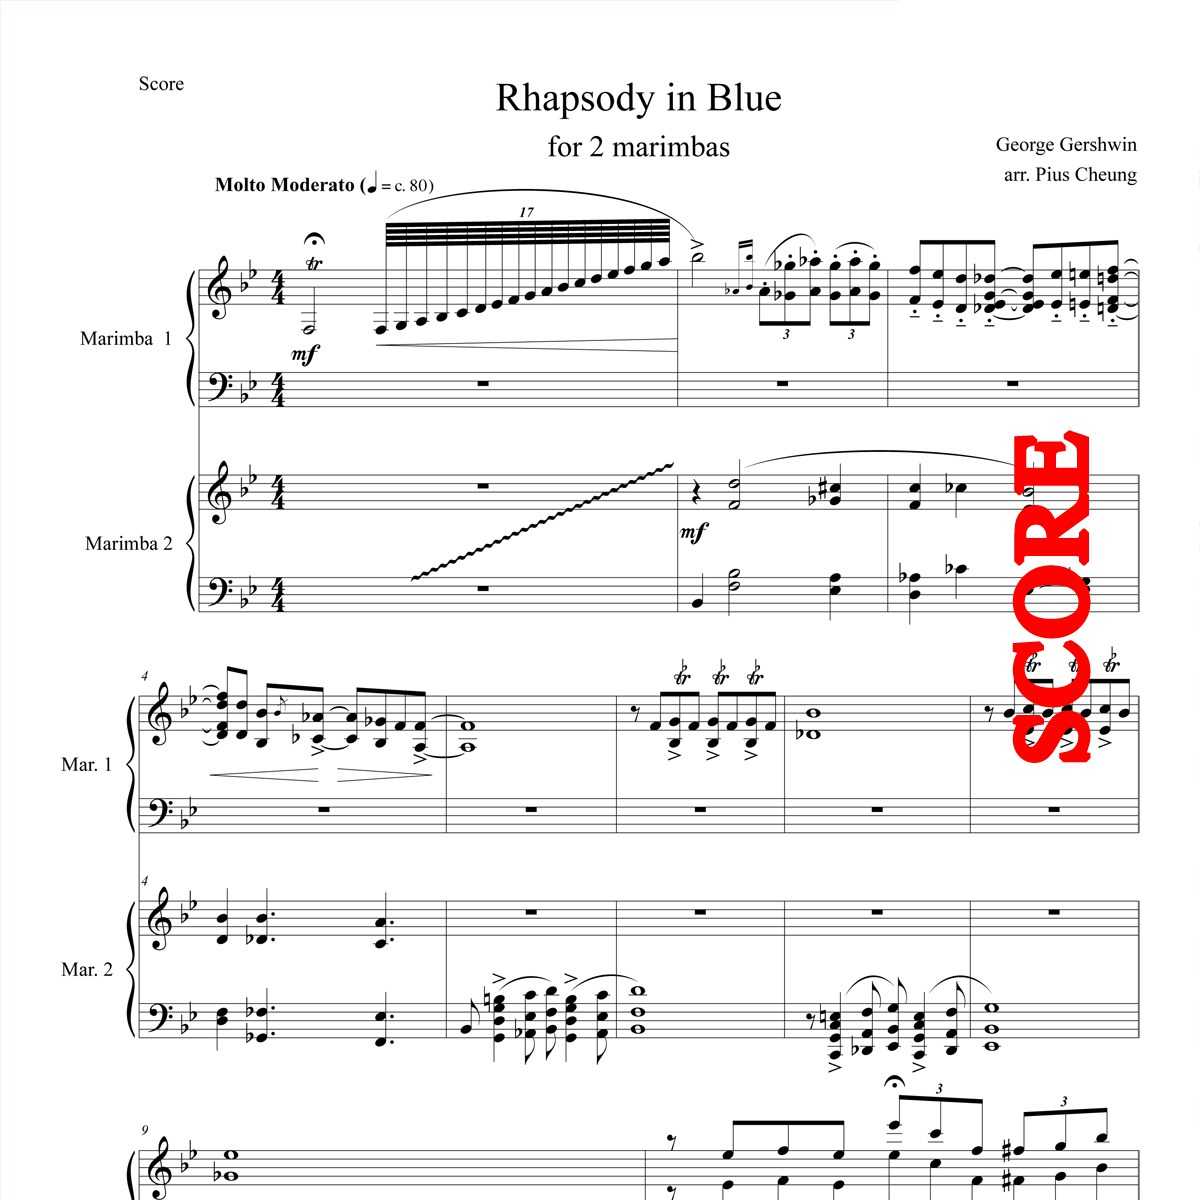 Rhapsody in Blue for marimba duo by Pius Cheung